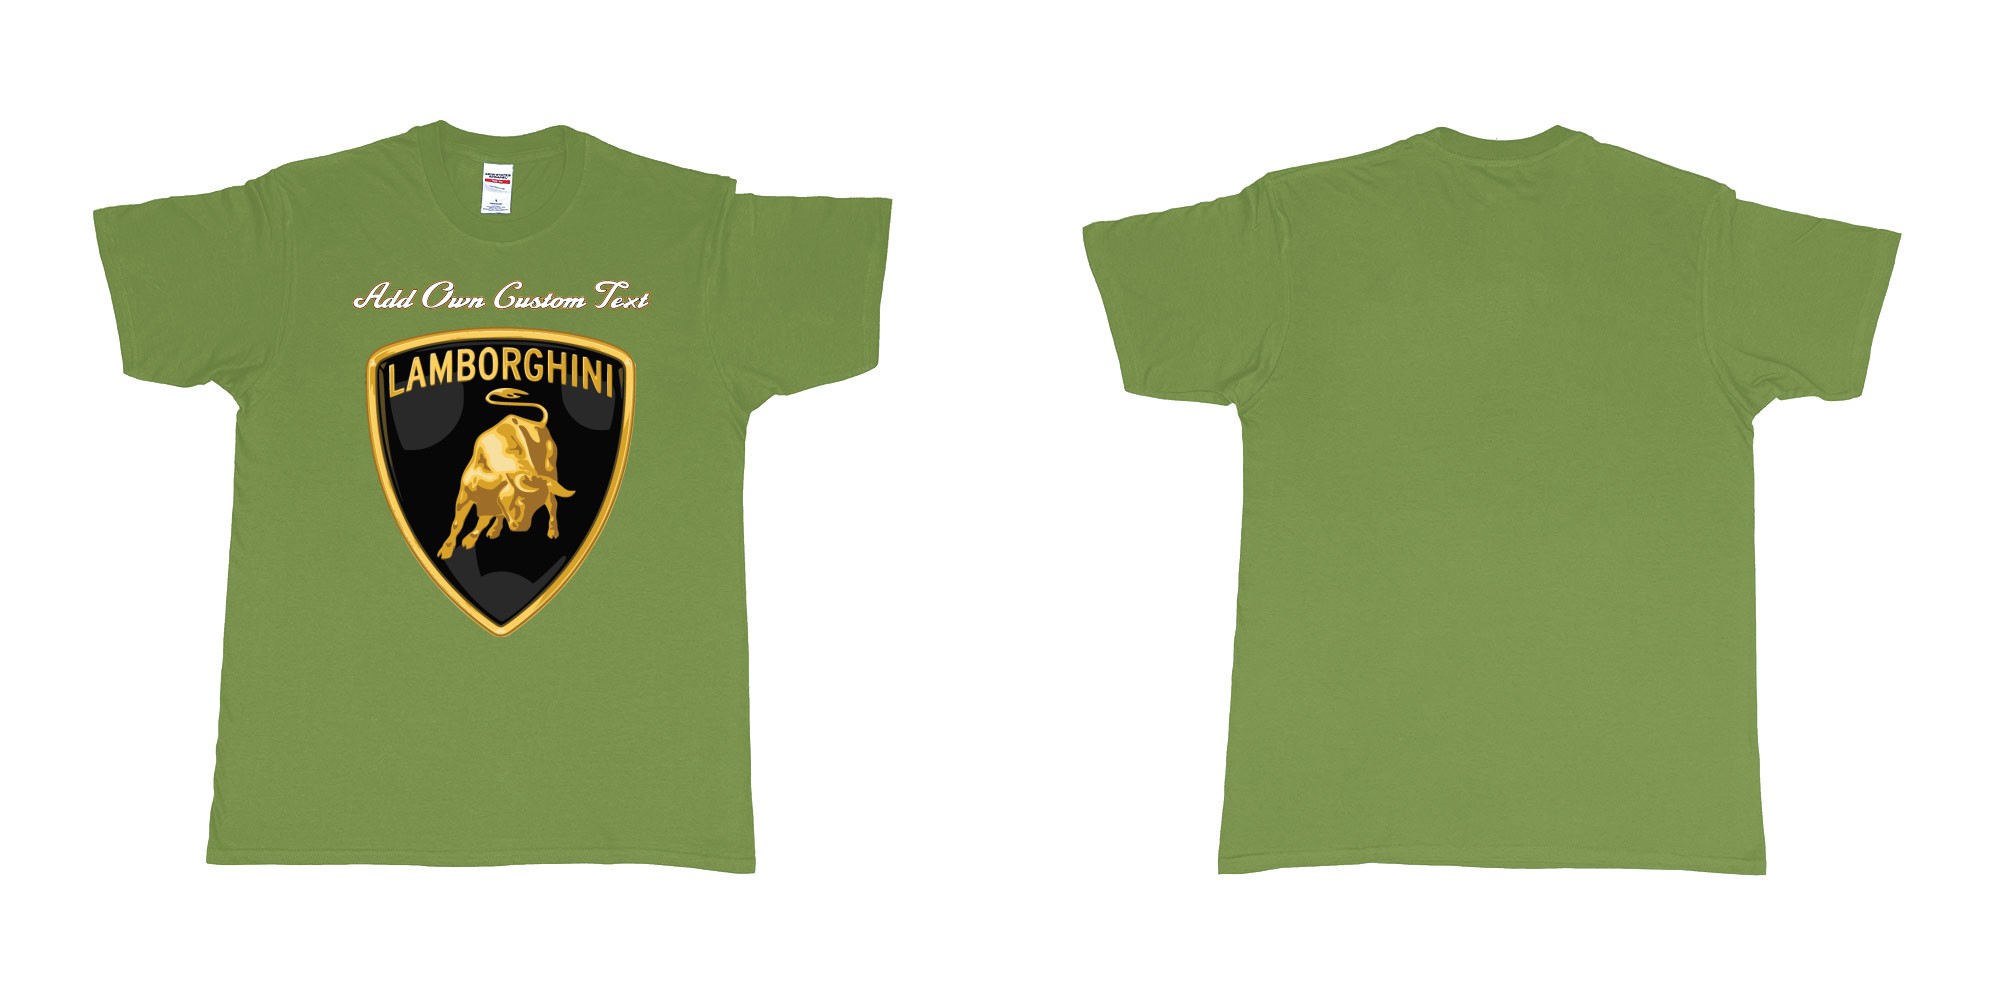 Custom tshirt design lamborghini logo tshirt printing add own text in fabric color military-green choice your own text made in Bali by The Pirate Way